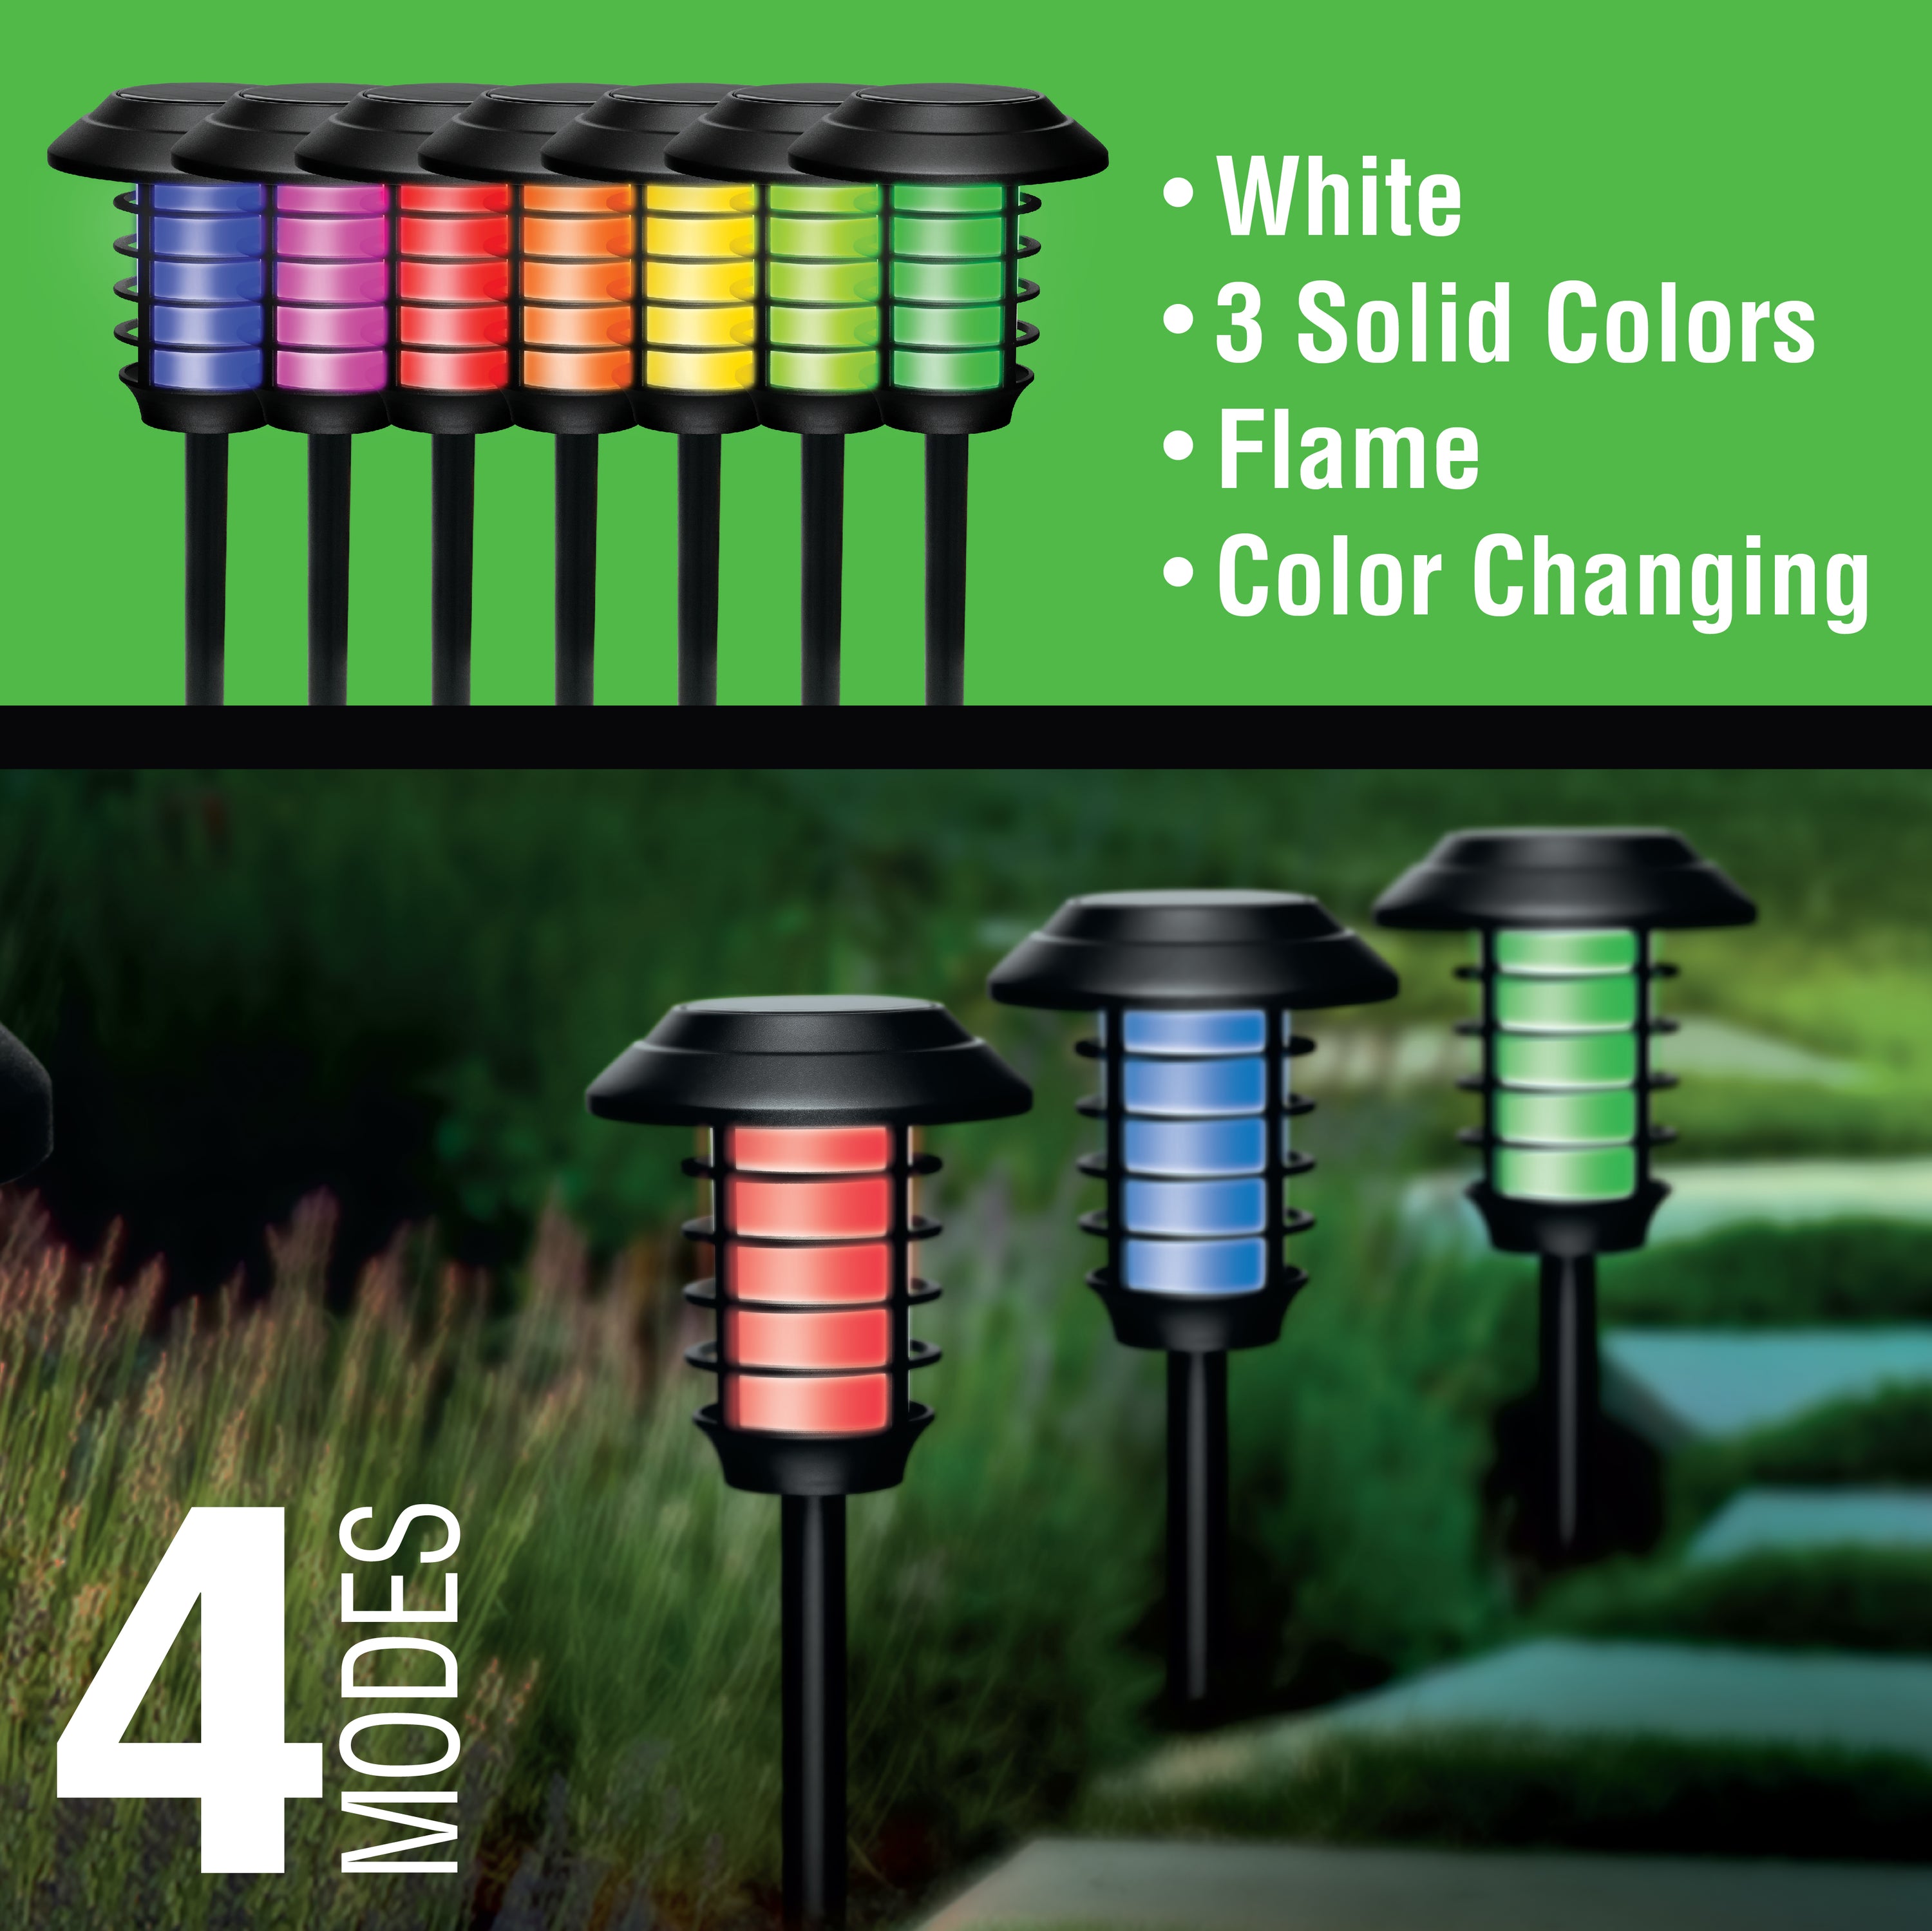 Bell + Howell Color Changing Solar Pathway Lights- 4 pack multipack